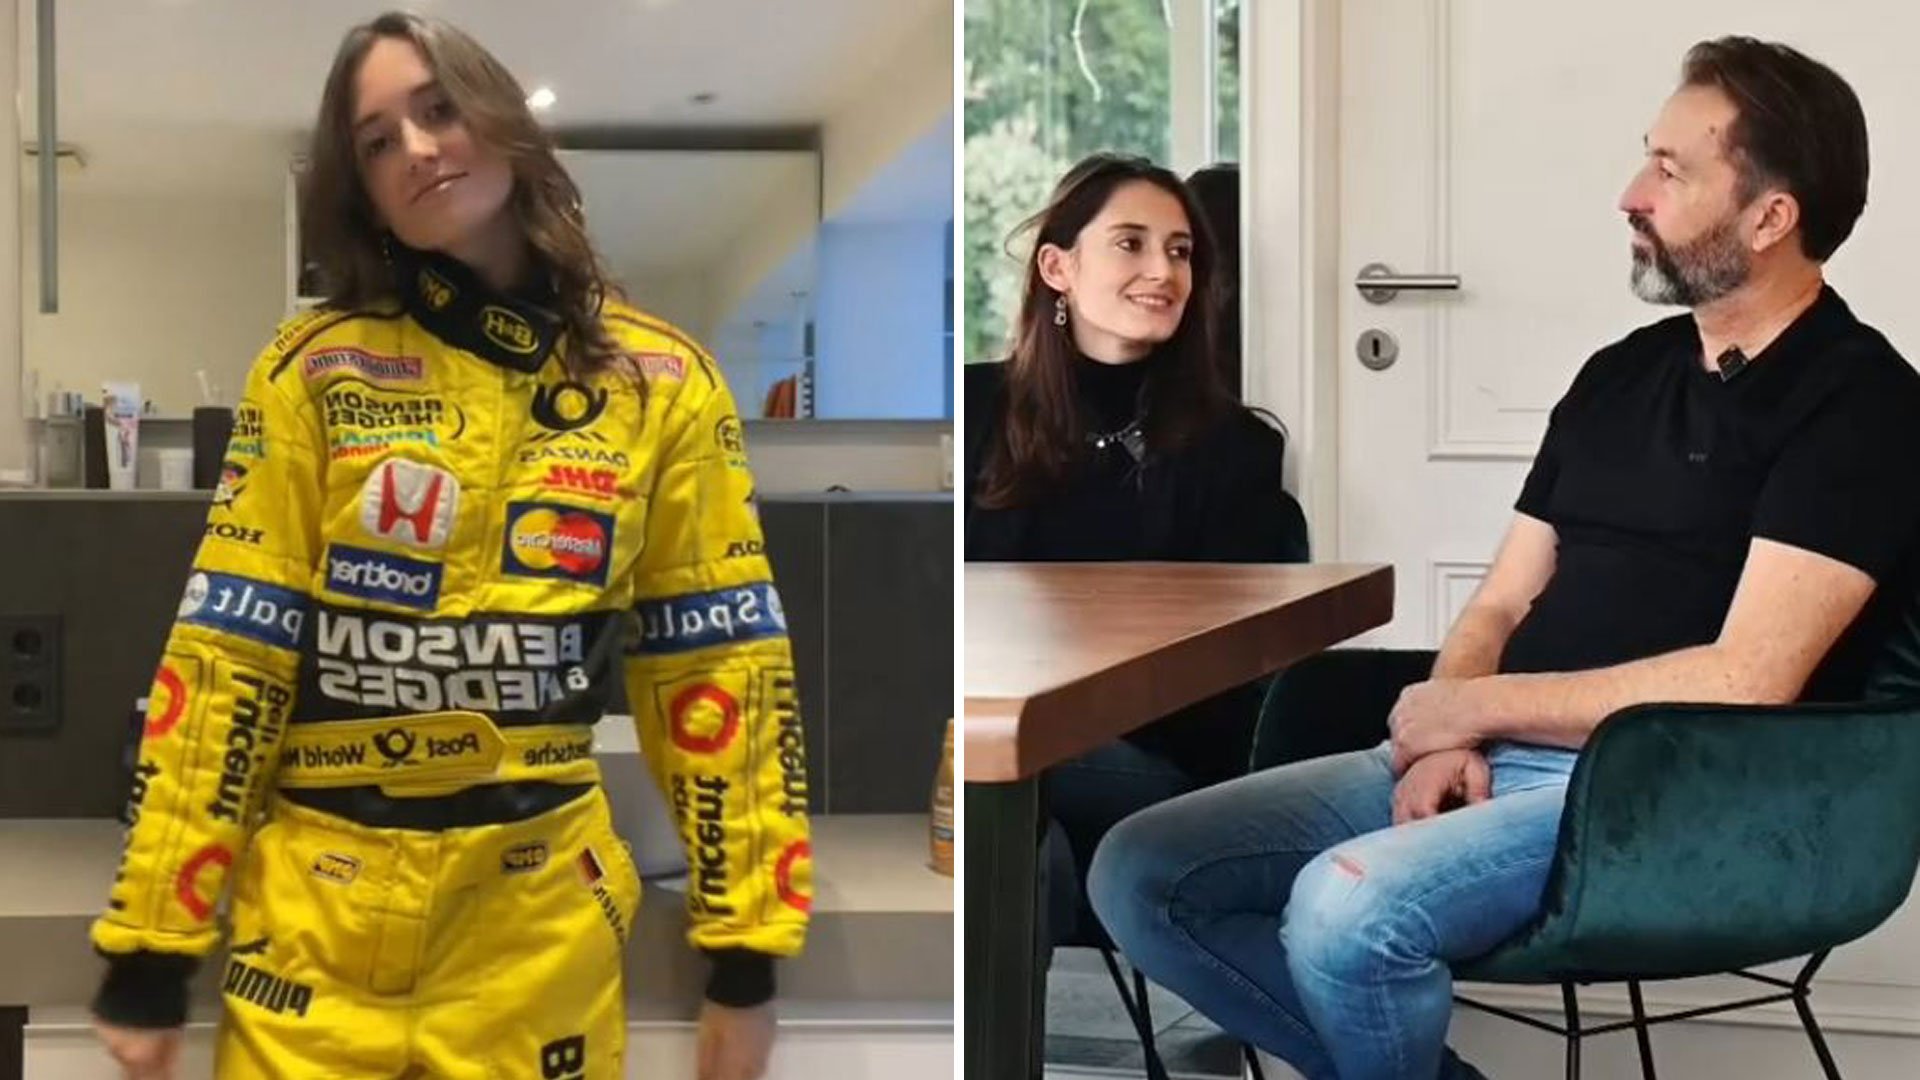 Iconic nineties F1 star looks unrecognisable in viral TikTok with his daughter as she tries on his old racing gear